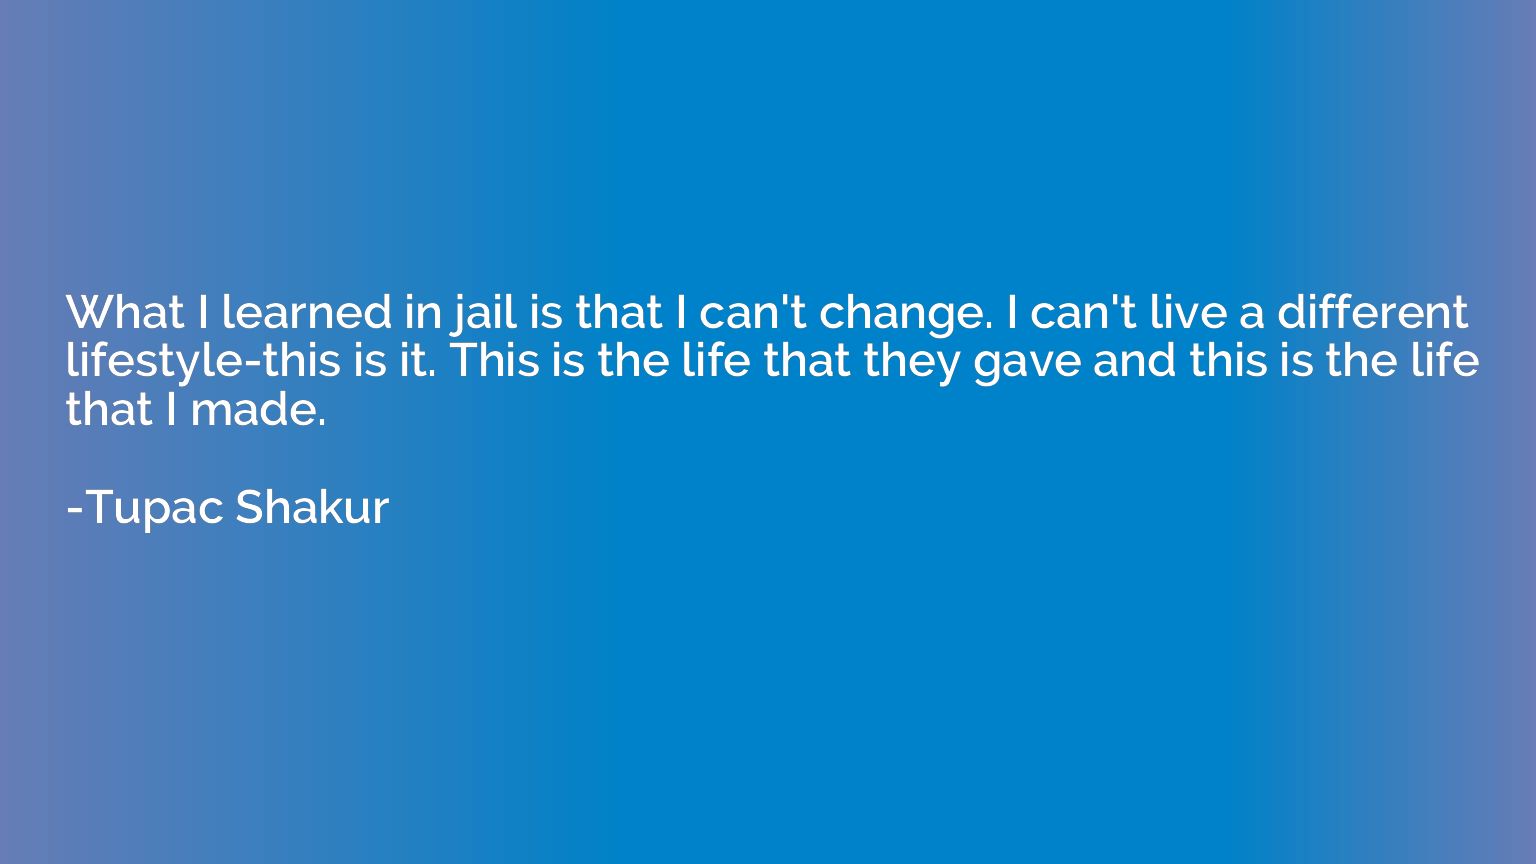 What I learned in jail is that I can't change. I can't live 